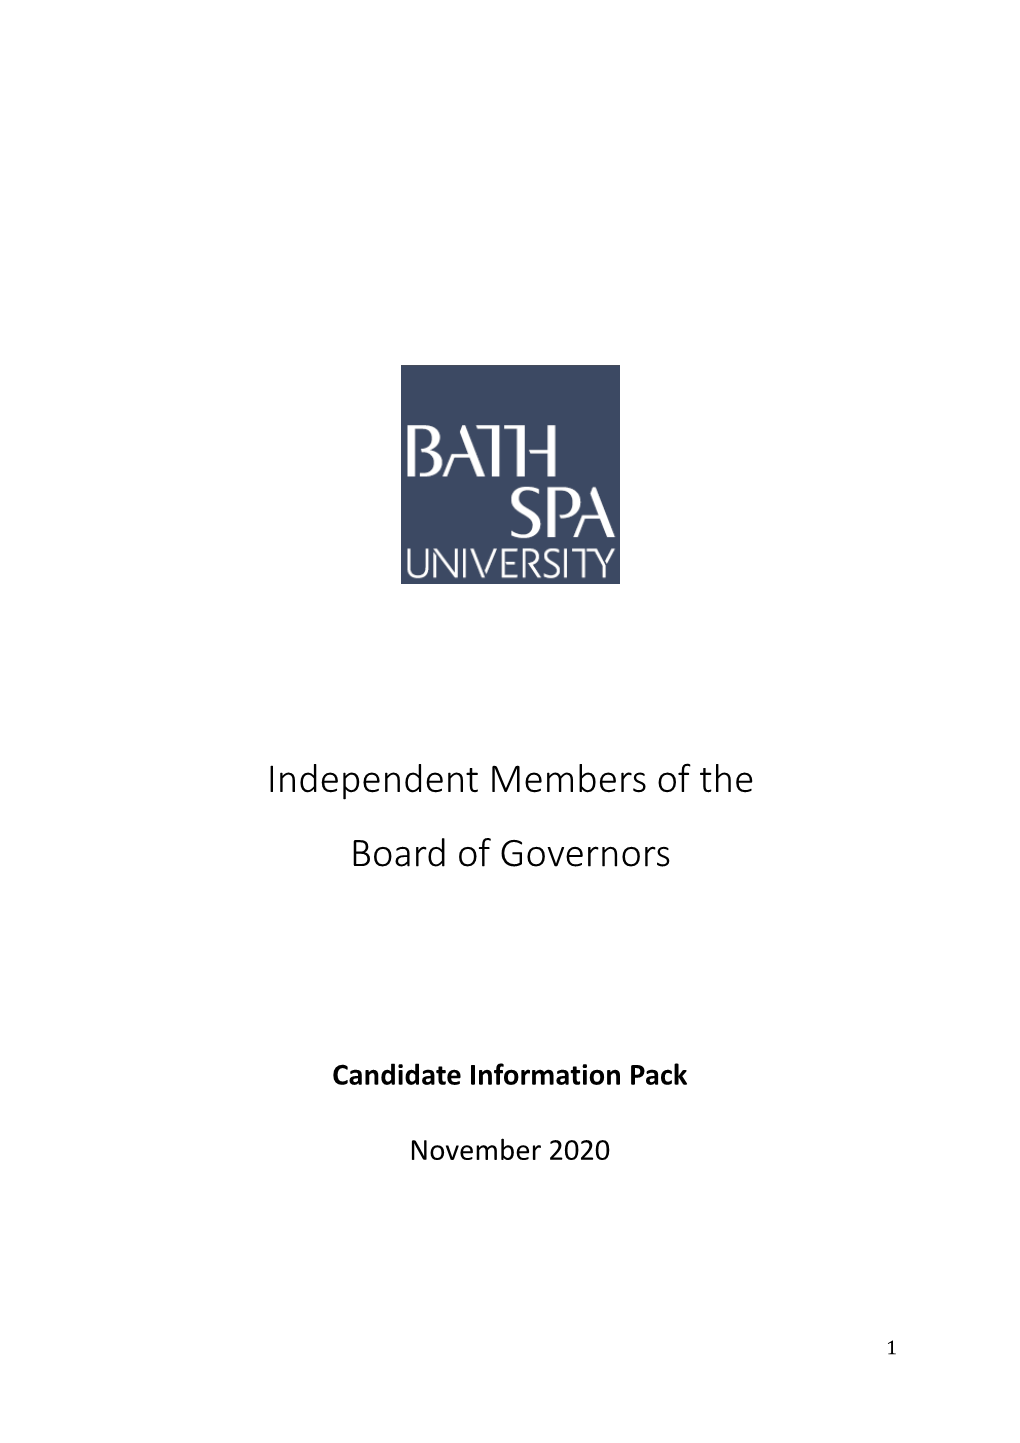 Independent Members of the Board of Governors